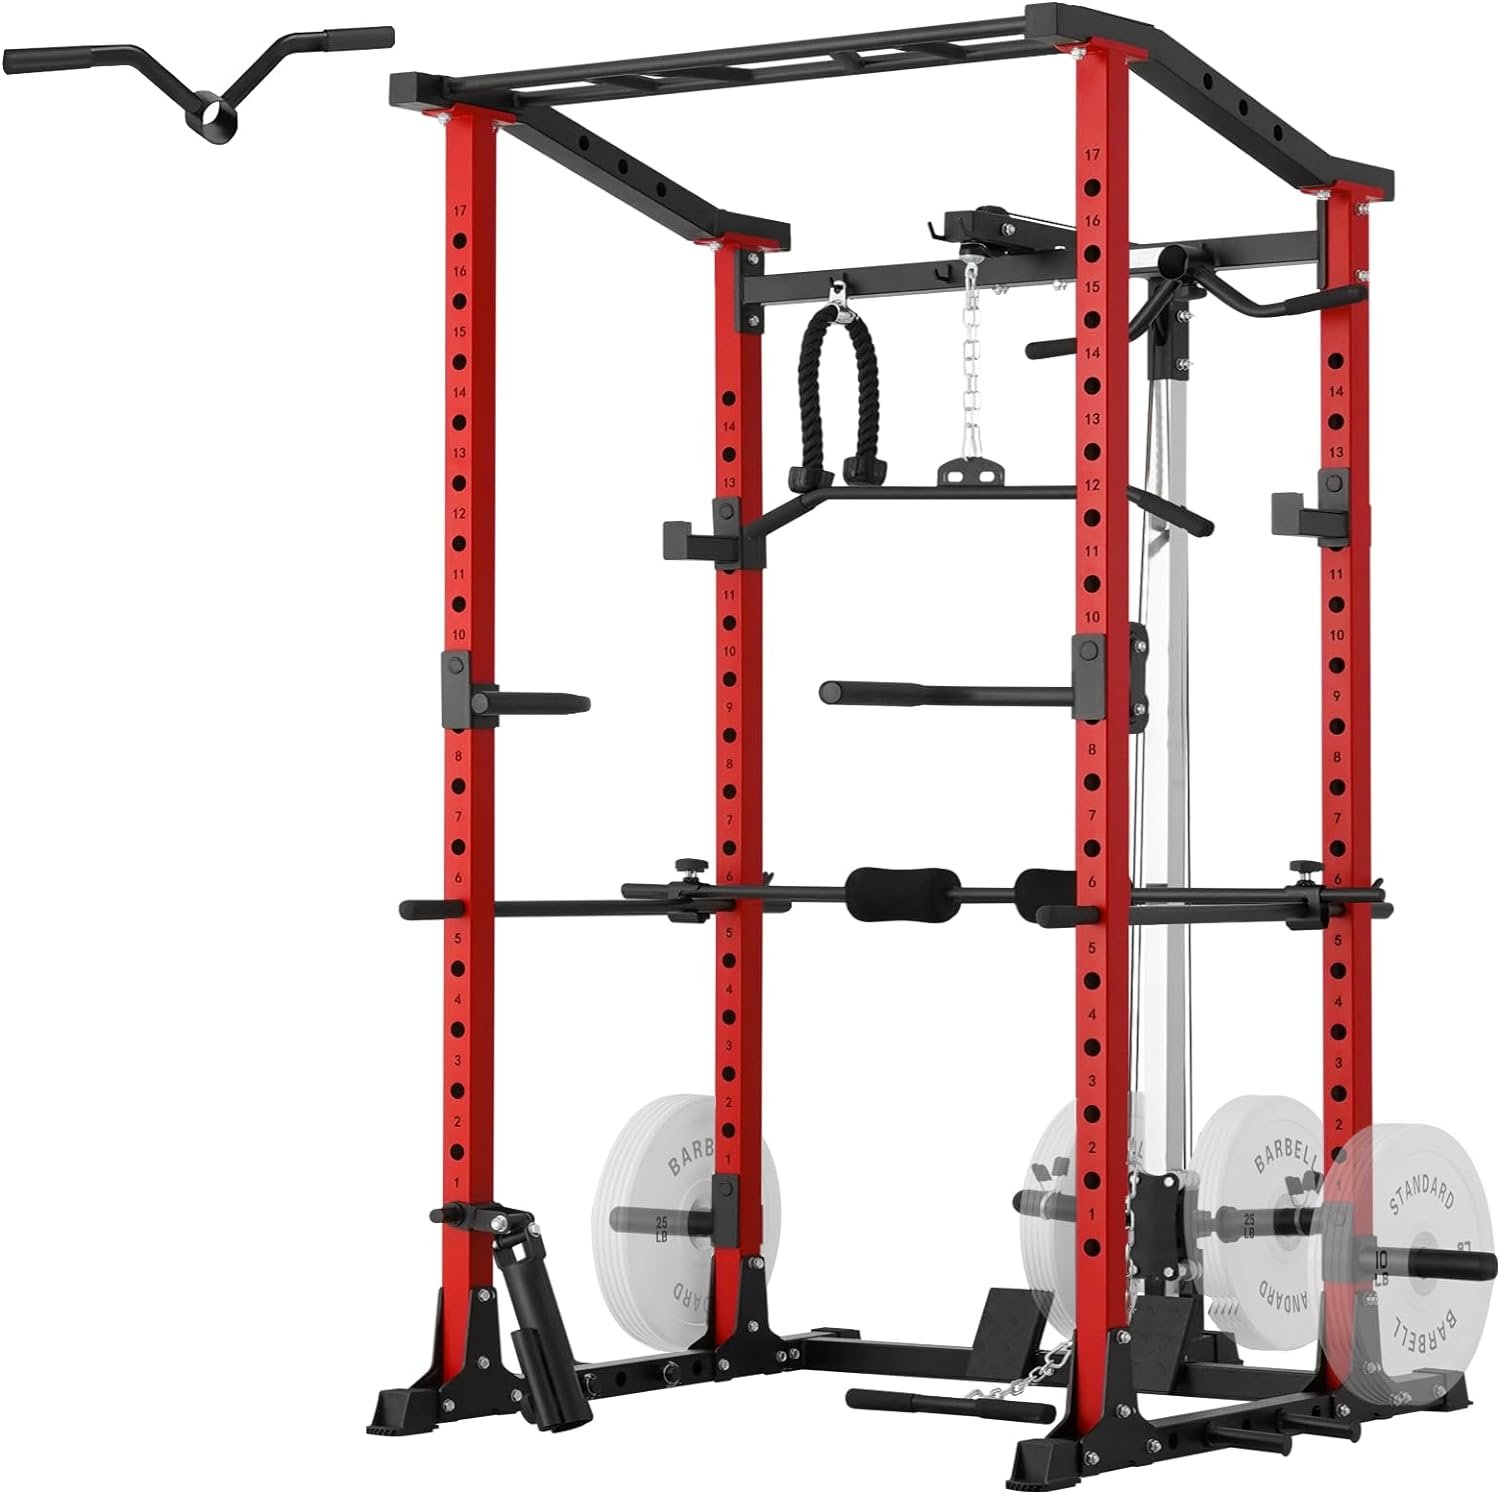 ER KANG Power Cage, 1200LBS Power Rack with LAT Pulldown, Multi-Function Squat Cage, Weight Cage with Pulley System Squat Rack for Home Gym with Training Attachment